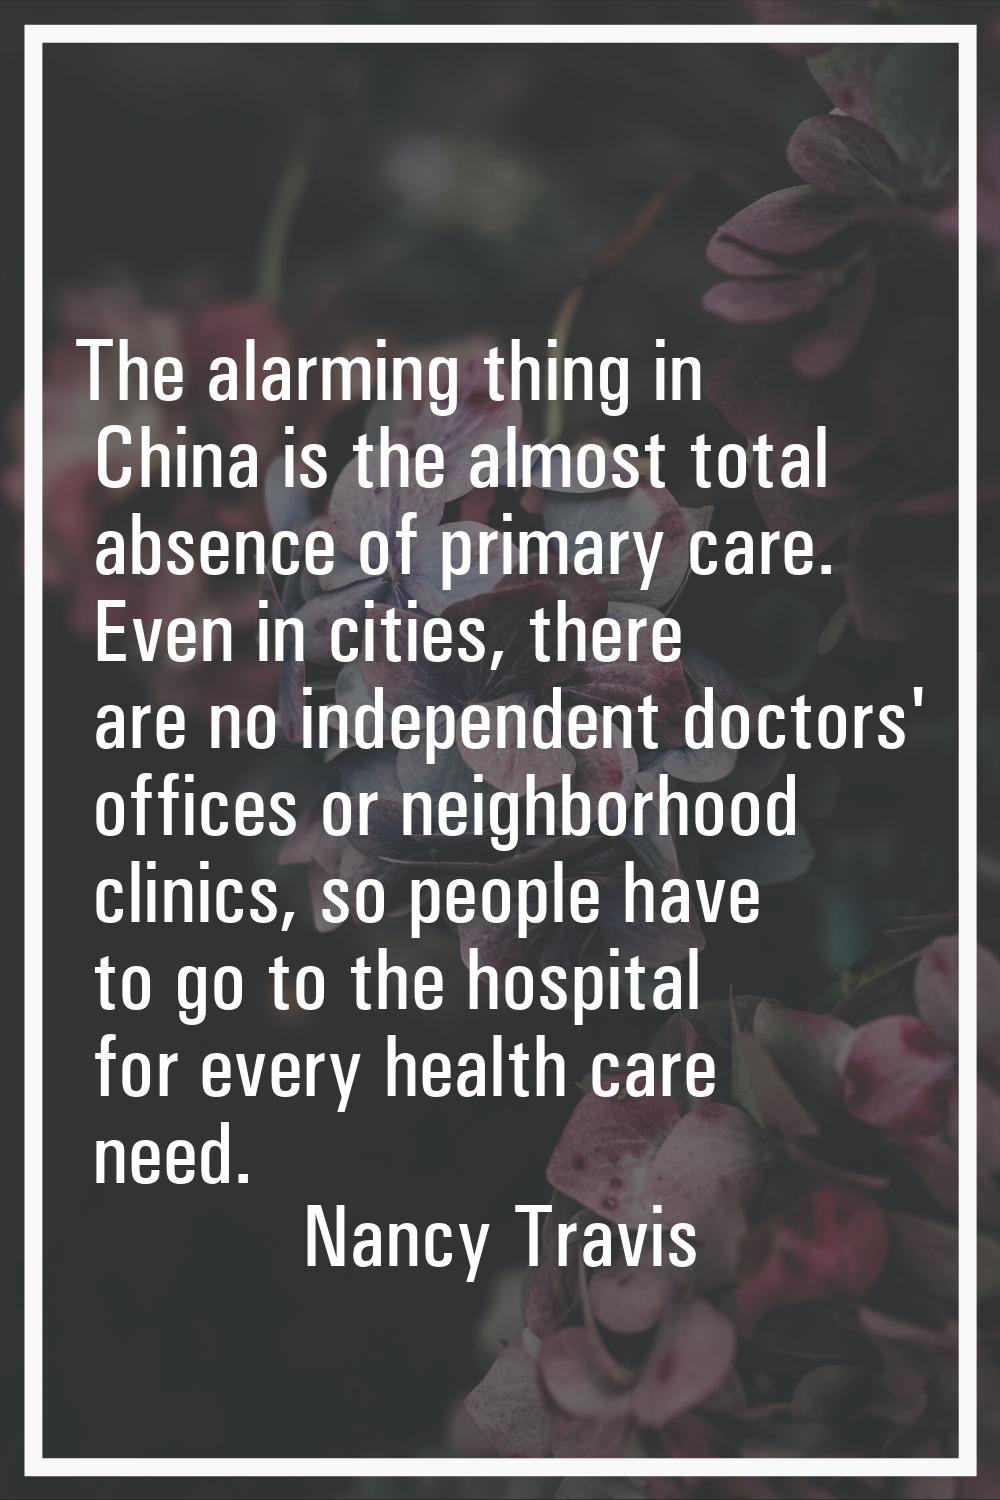 The alarming thing in China is the almost total absence of primary care. Even in cities, there are 